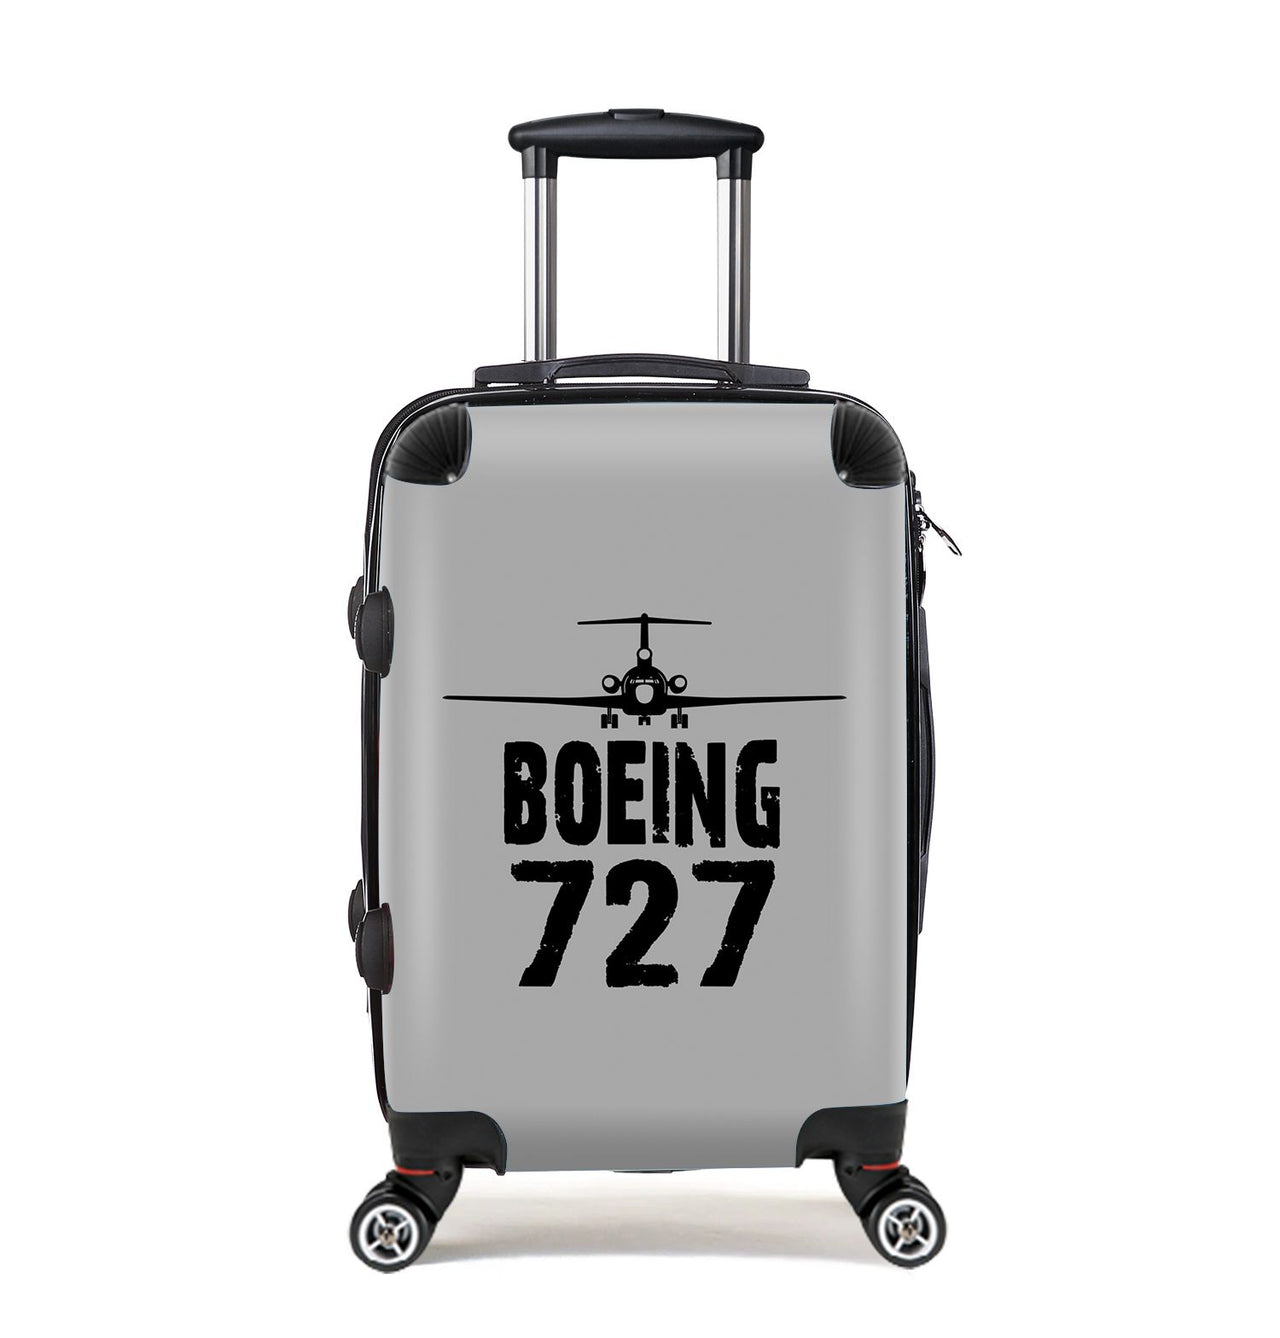 Boeing 727 & Plane Designed Cabin Size Luggages